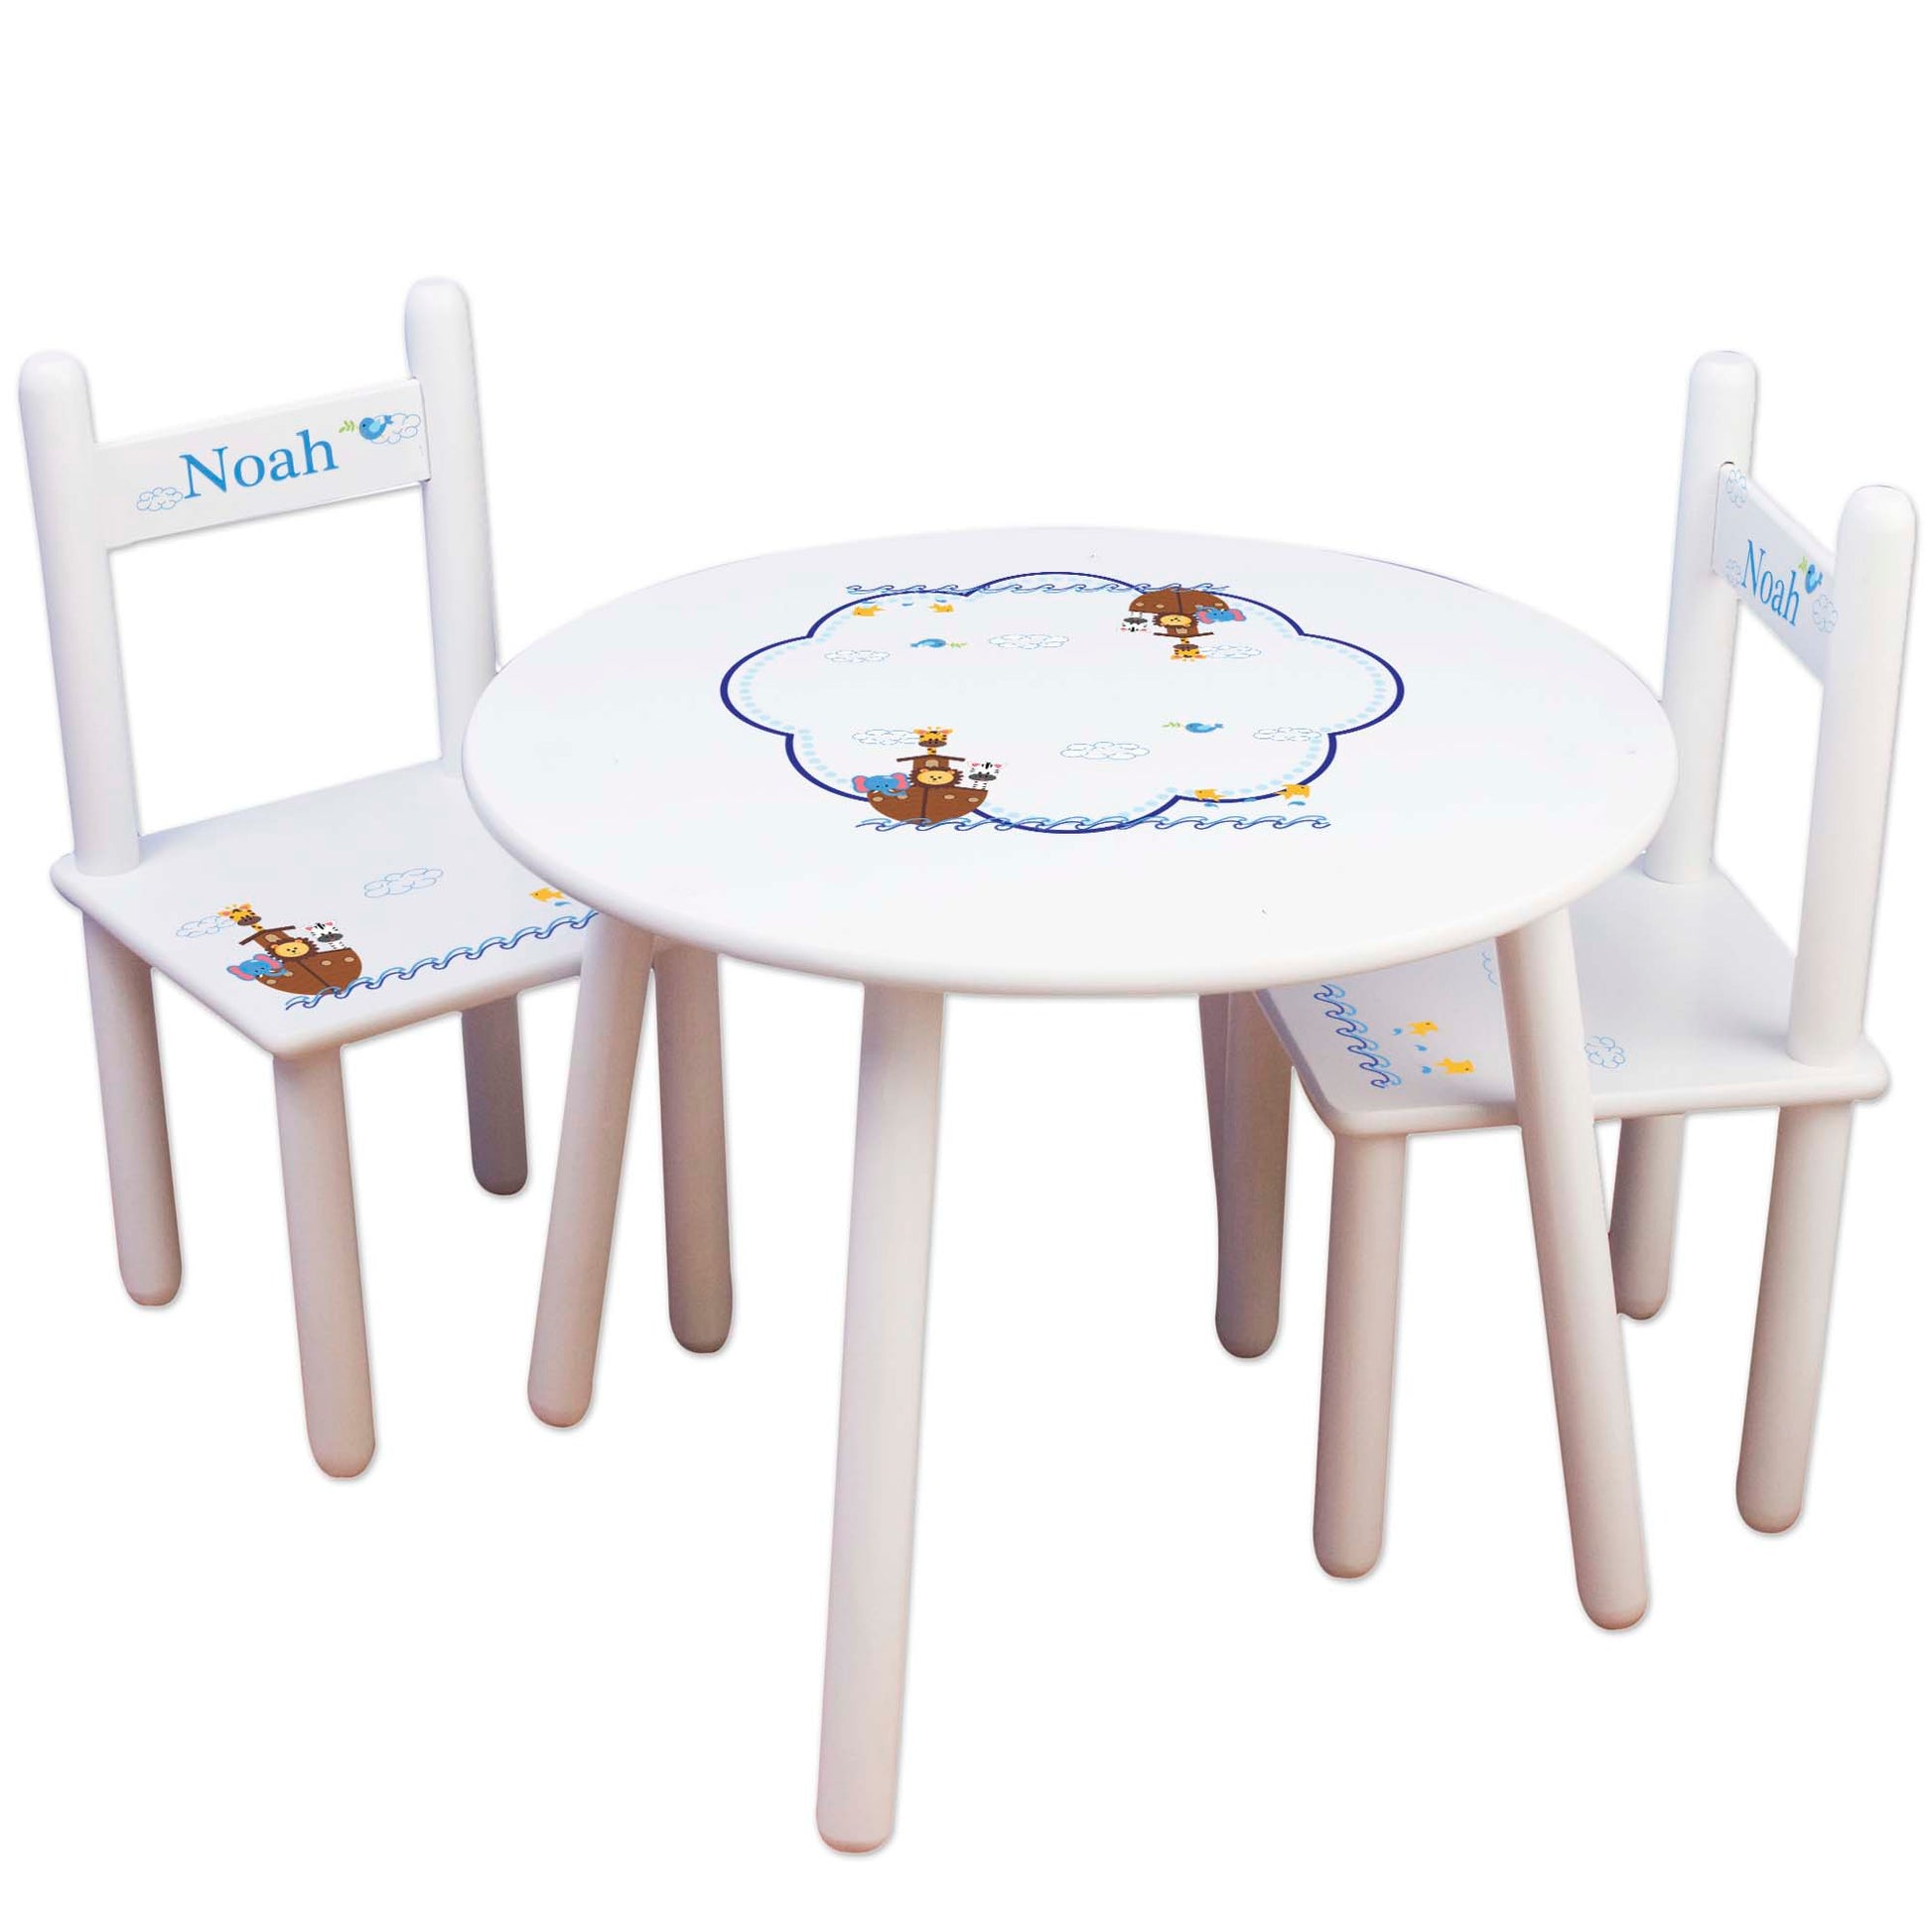 childs personalized noah's ark table chair set